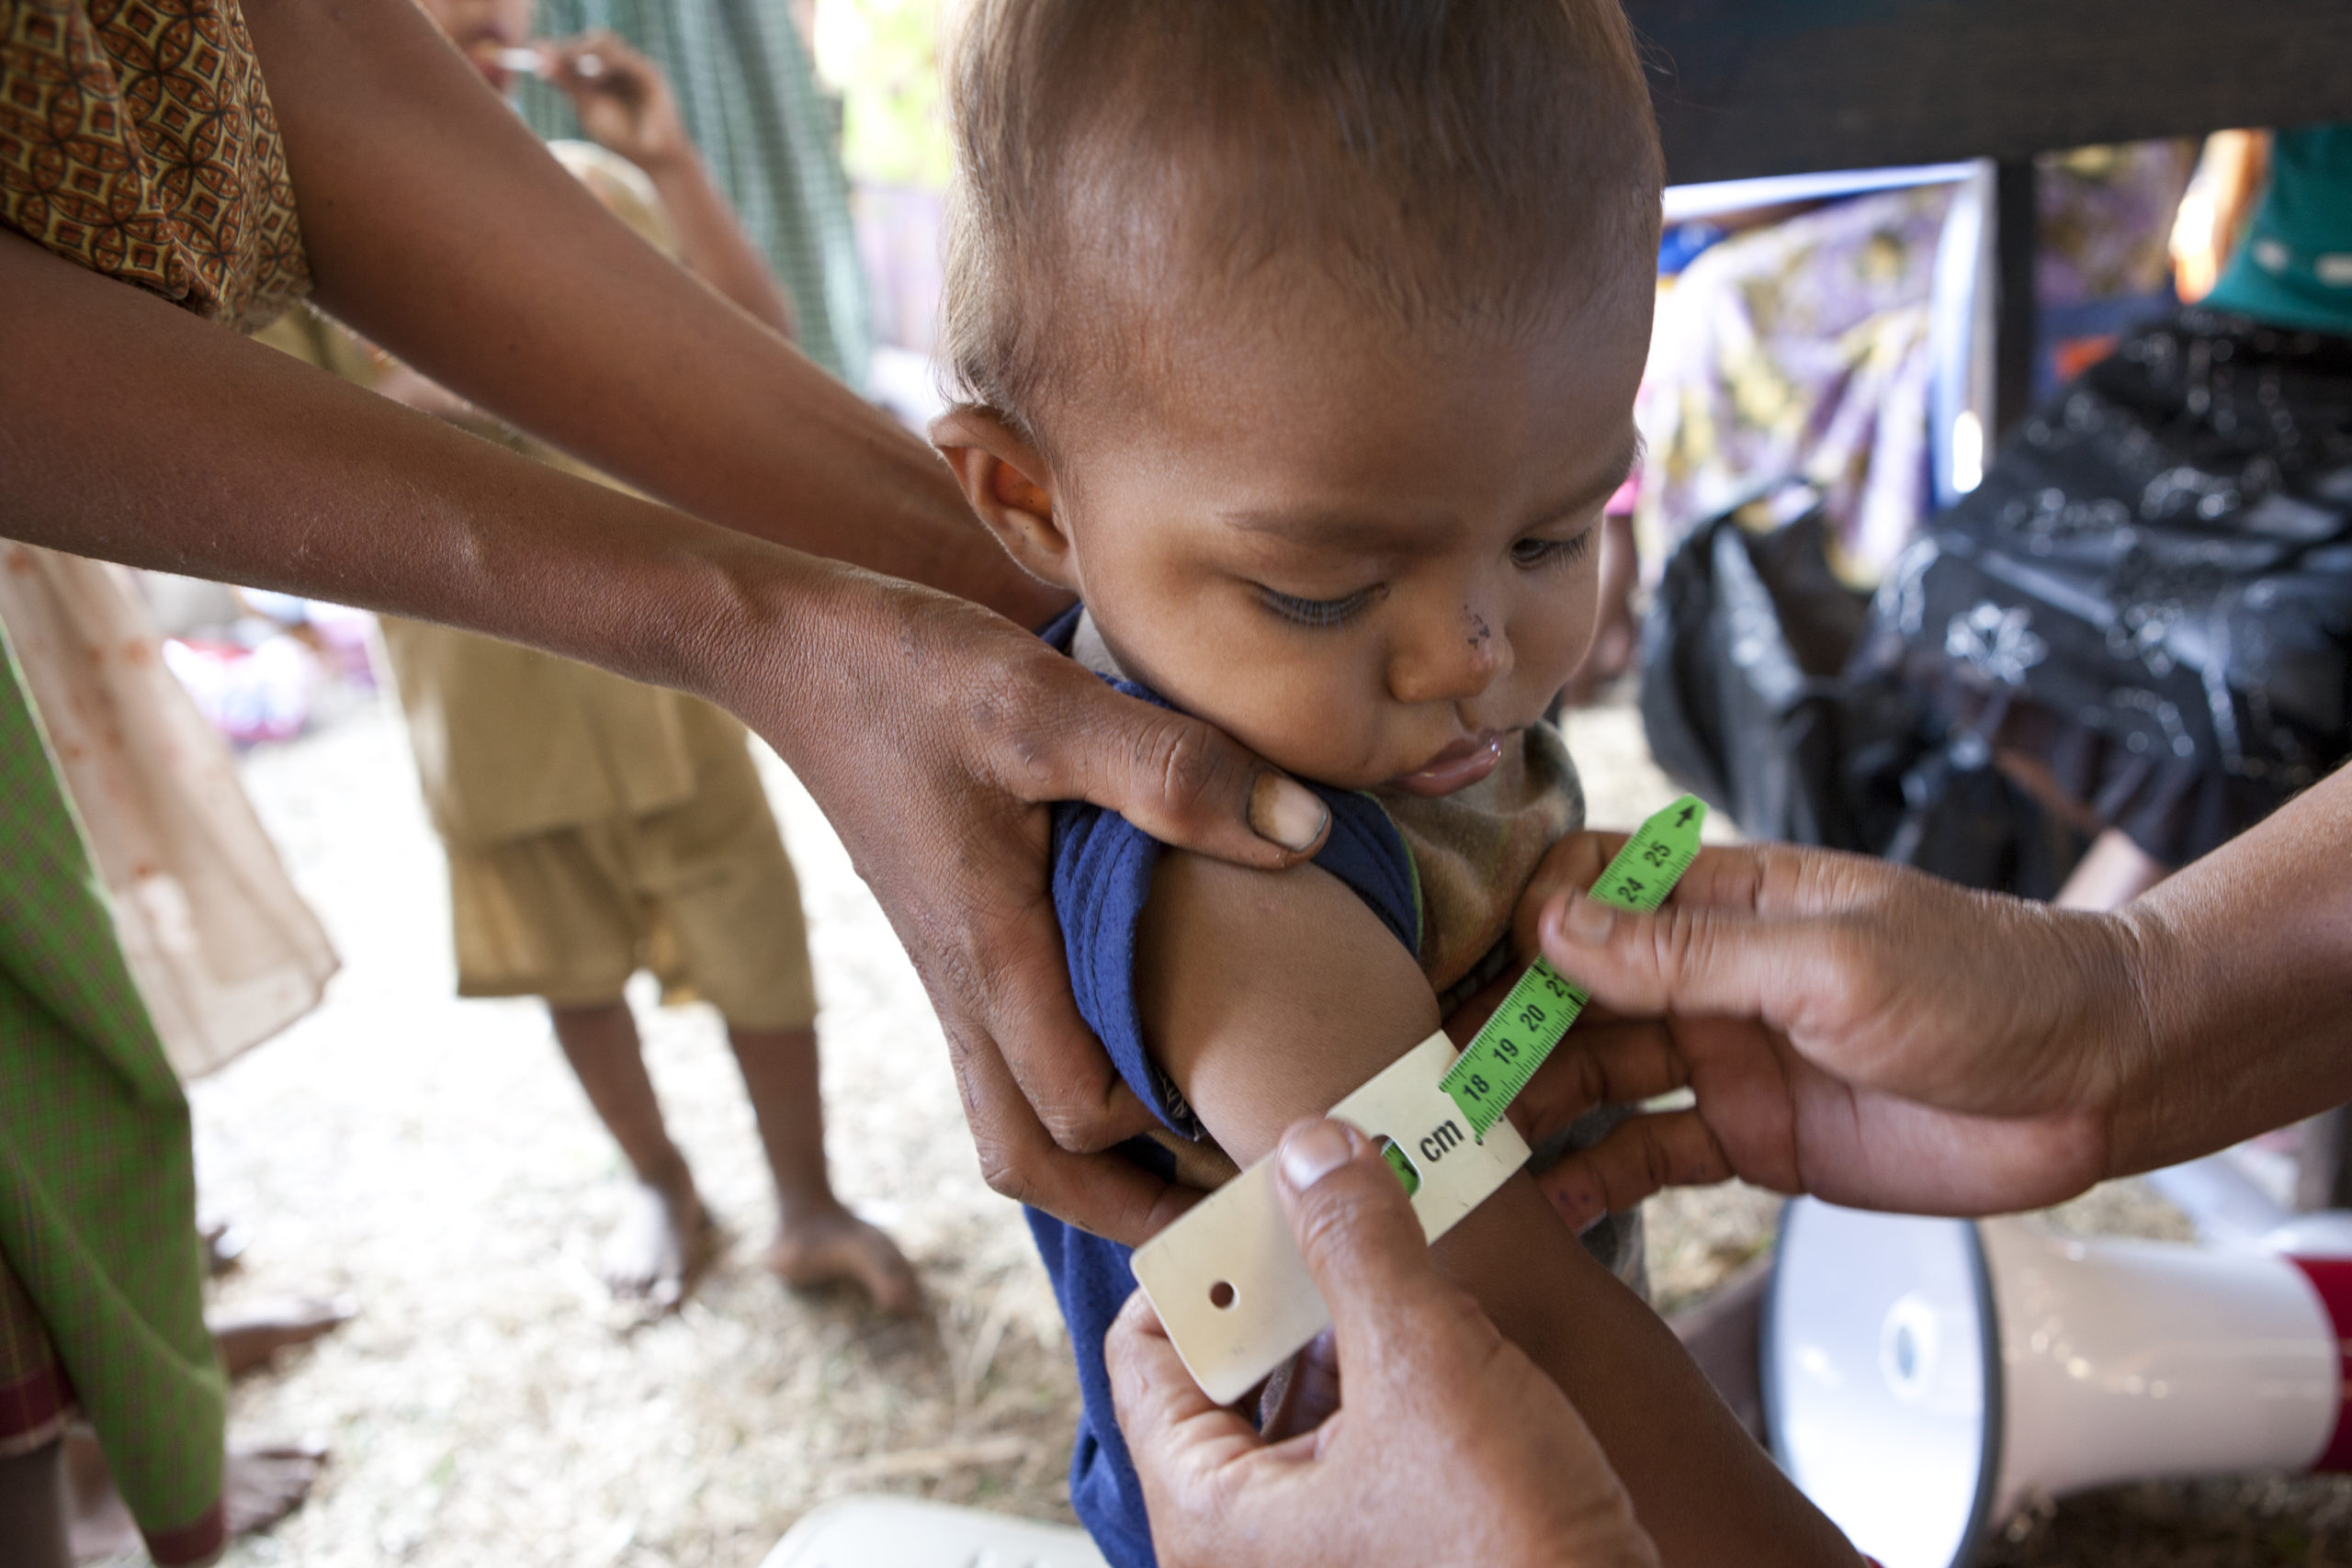 Globally, 24 million children are at risk of missing out on vaccines.